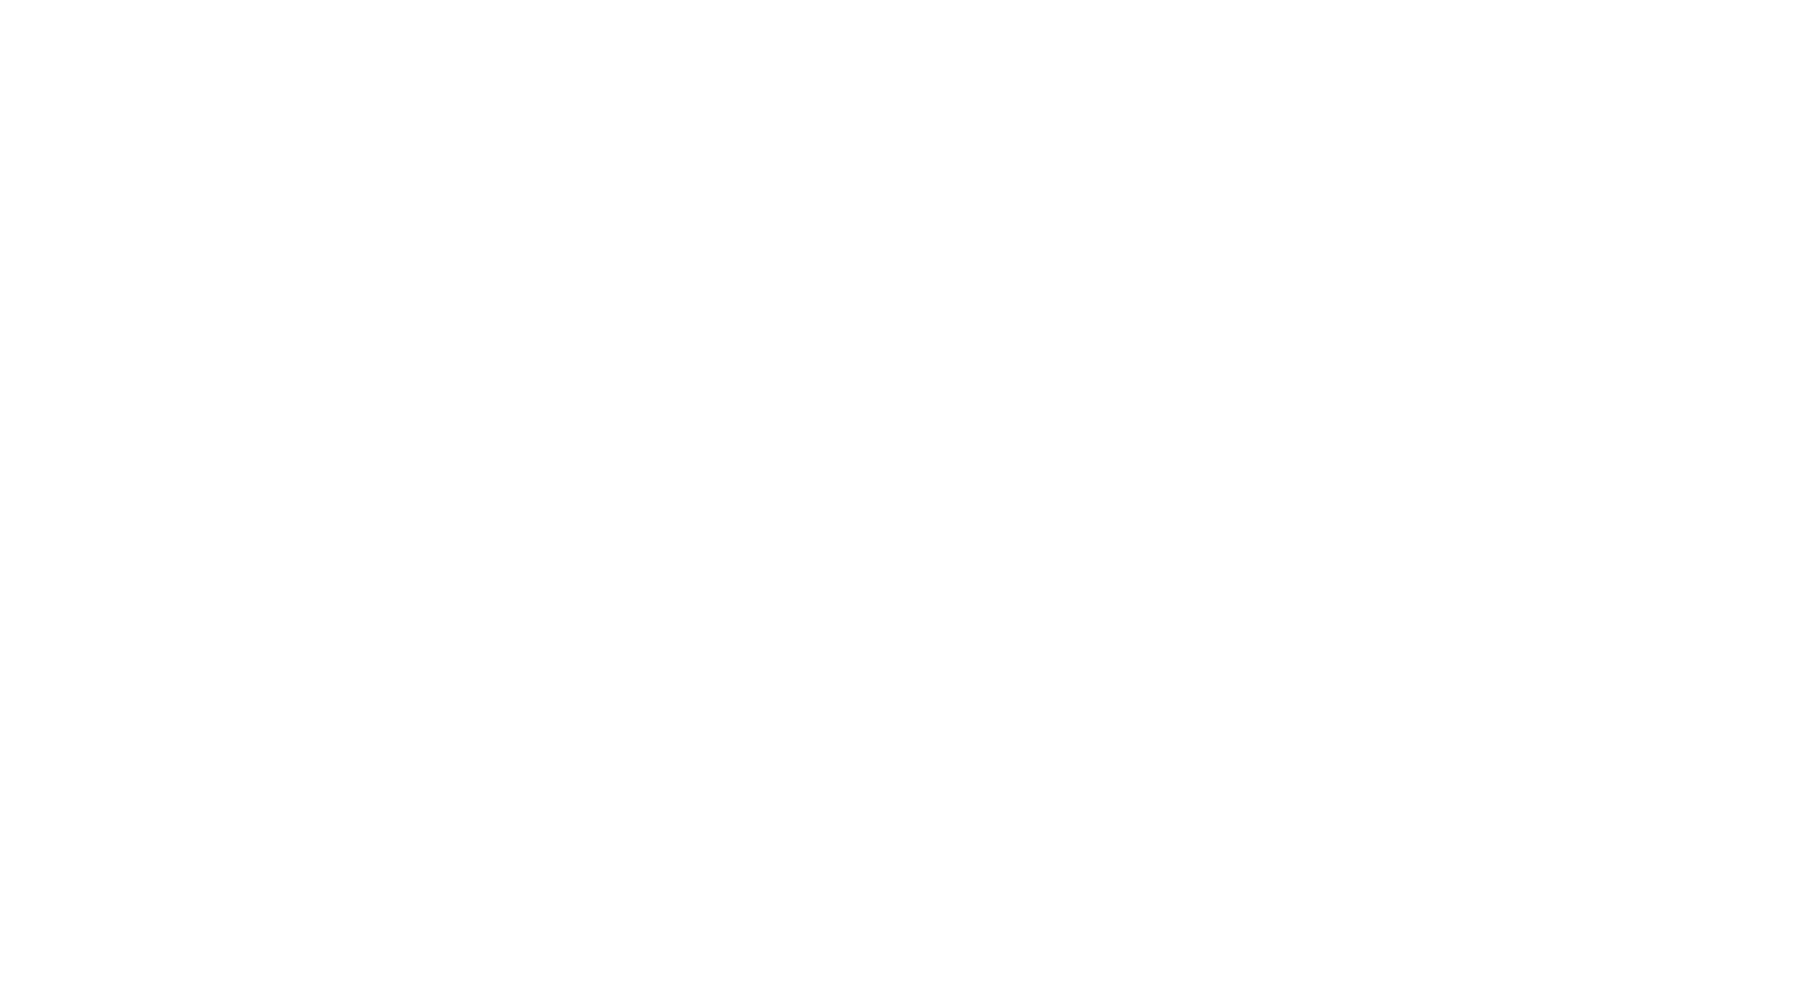 Project Bakeover